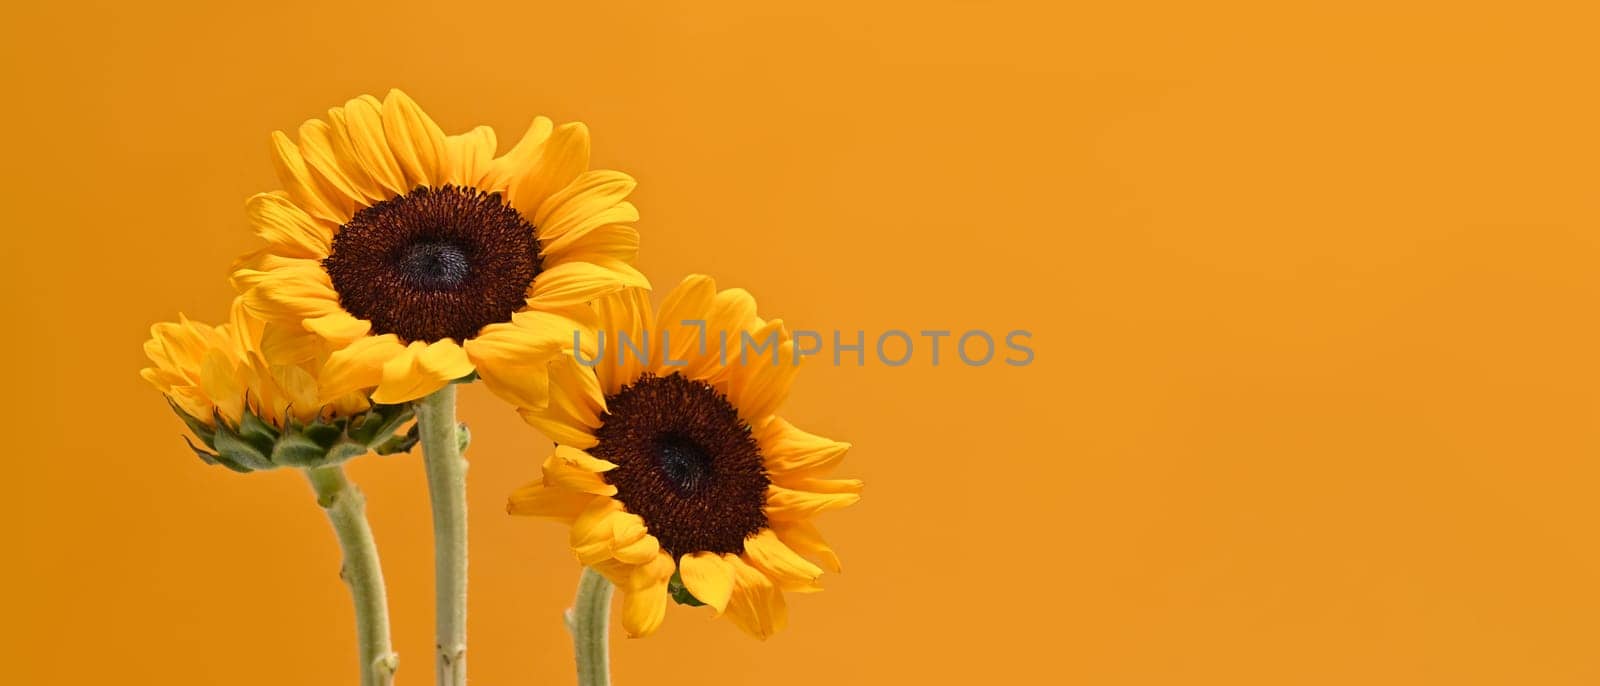 Bouquet of sunflowers on light yellow background with copy space for your text by prathanchorruangsak